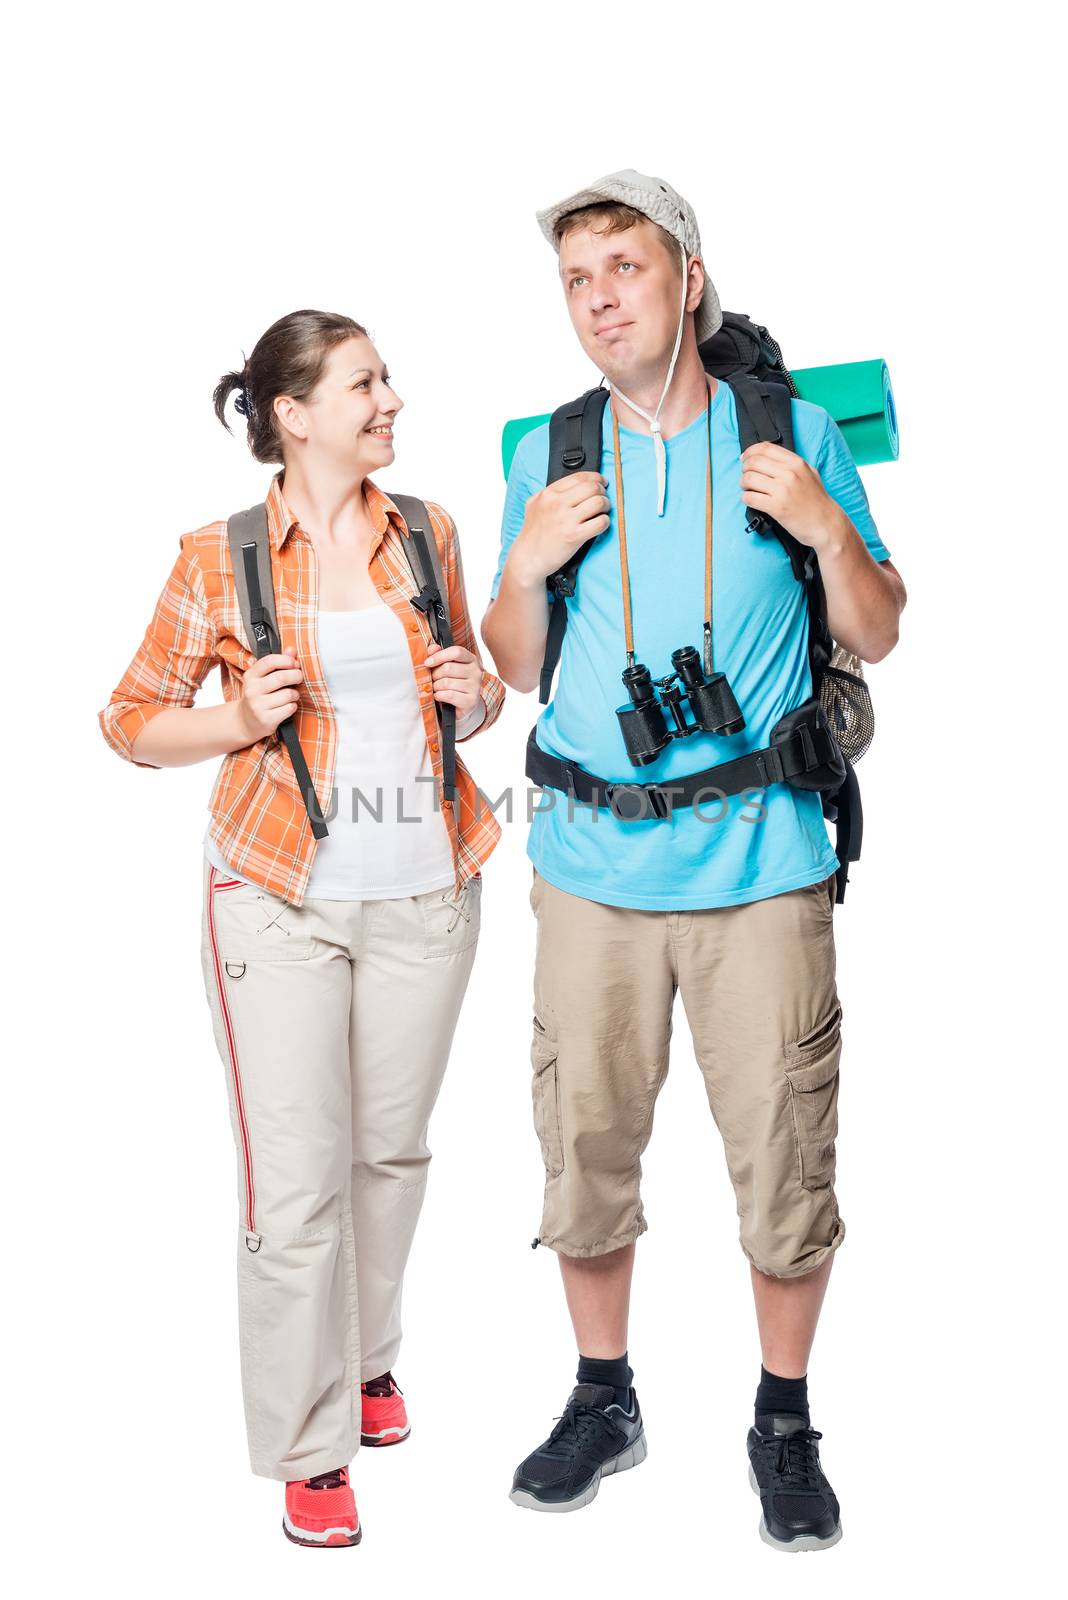 smiling travelers with backpacks on a white background by kosmsos111